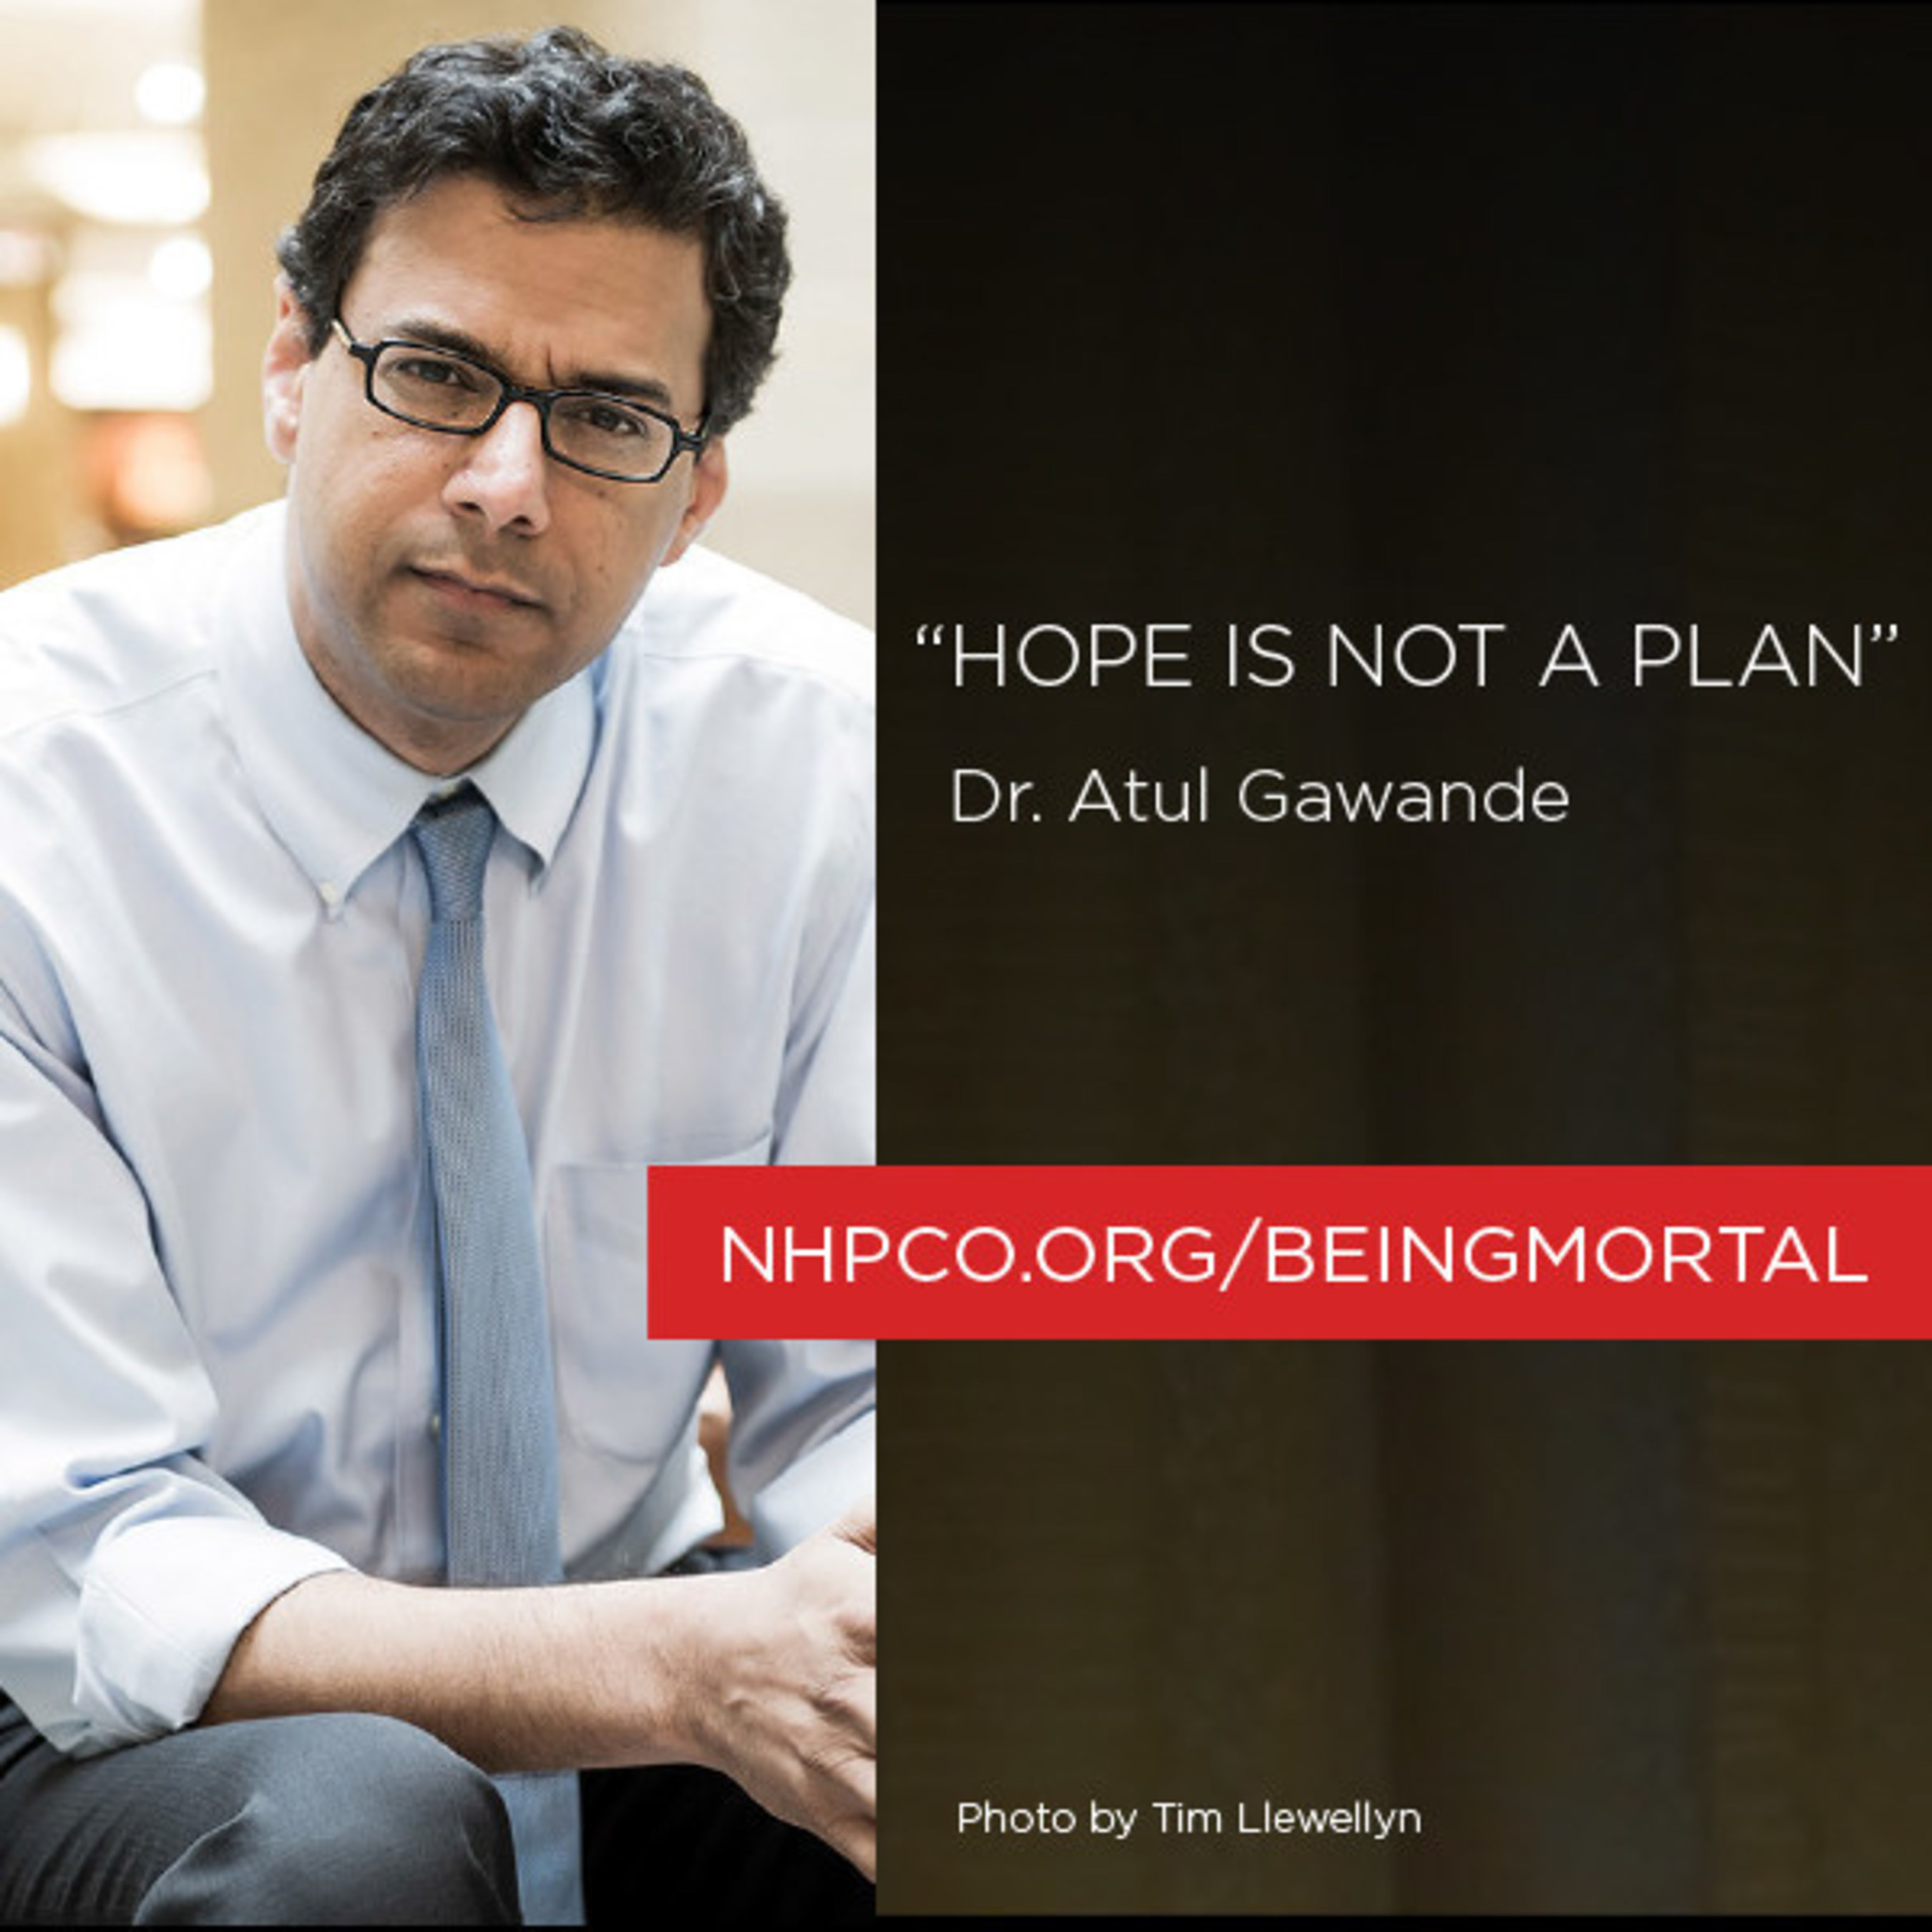 Best-selling author Dr. Atul Gawande, will  participate in a panel discussion following the Congressional film screening of the PBS Frontline special based on his book, "Being Mortal."